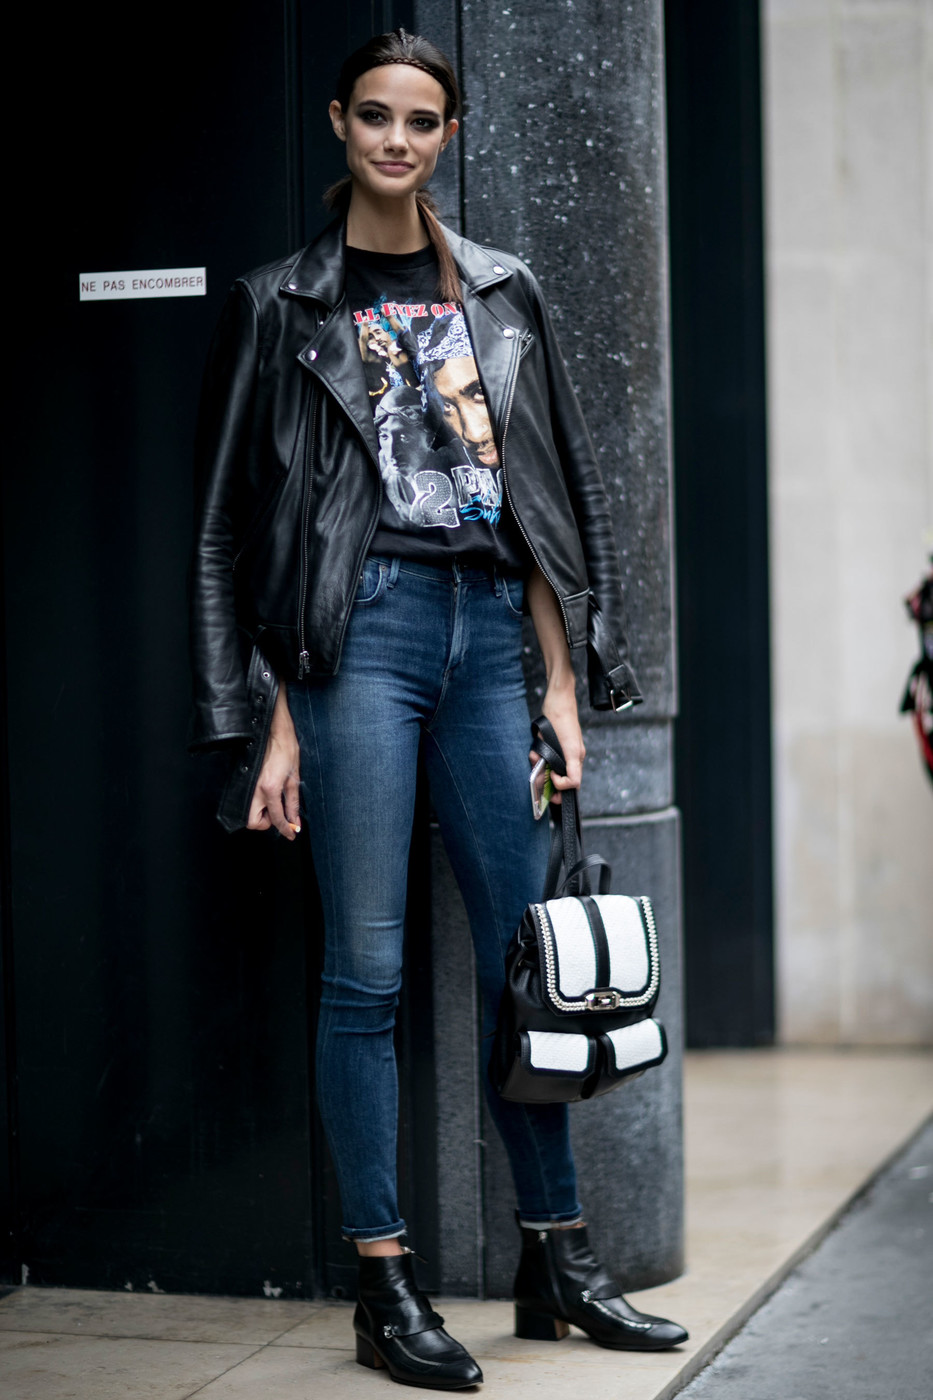 Model Street Style Trend: Band Tees & Musical Inspiration - The Front ...